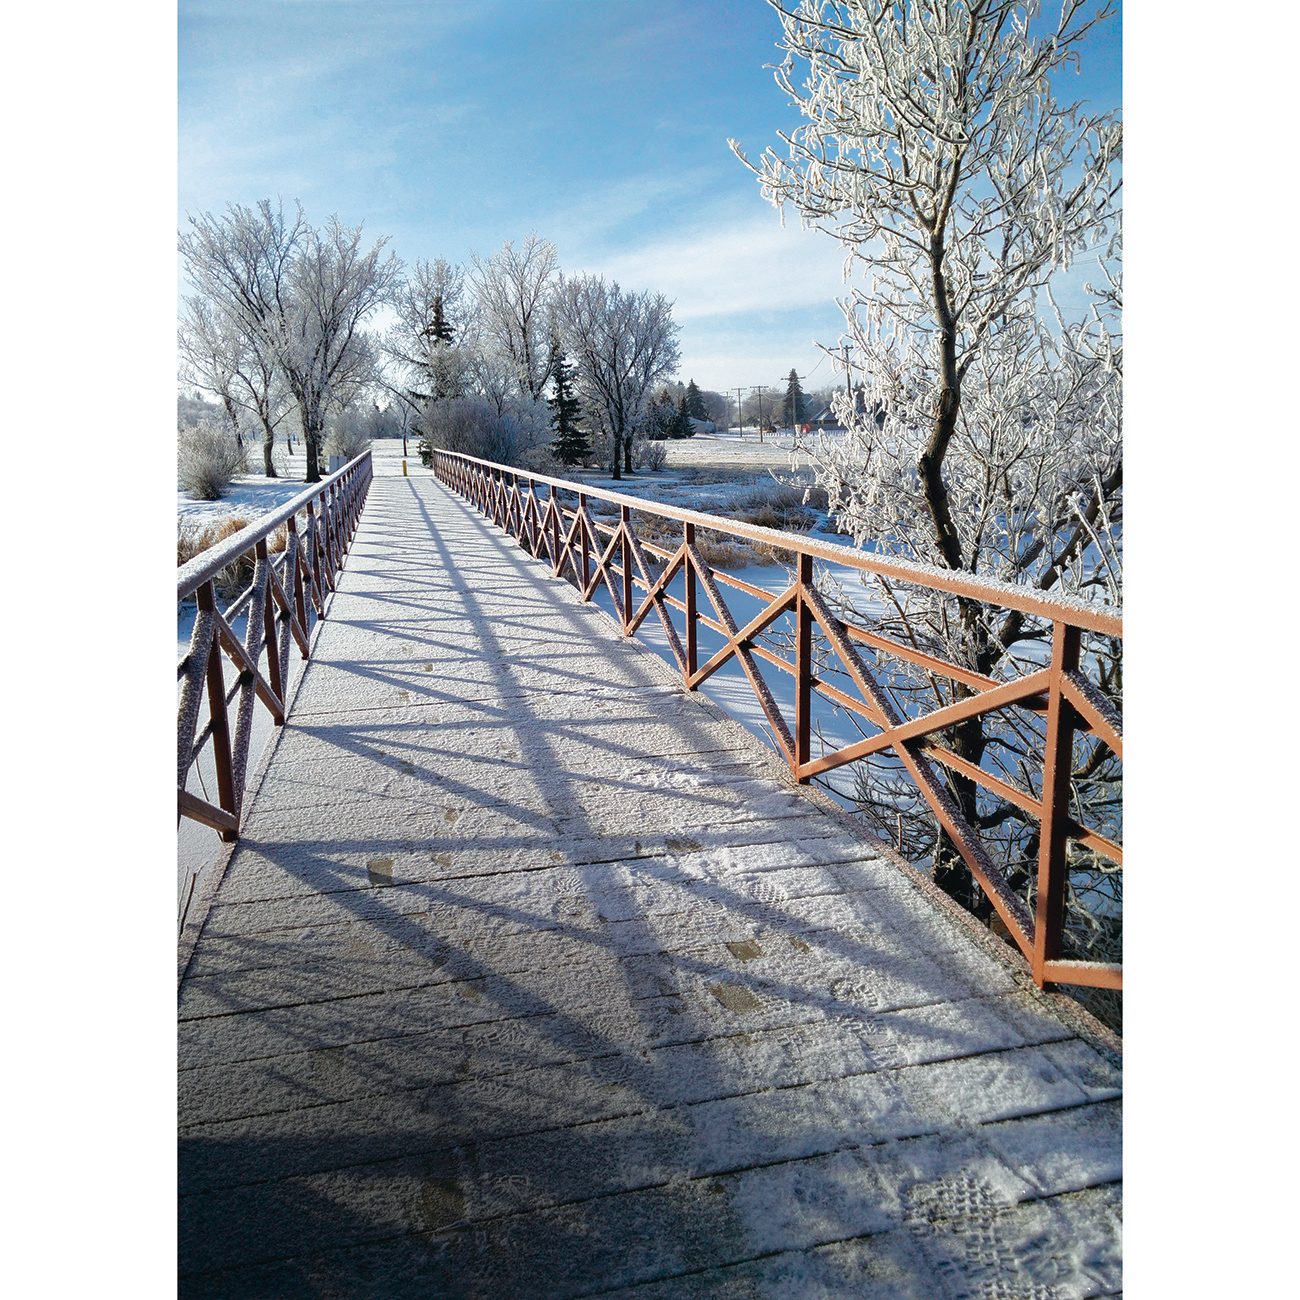 Beauty of the Canadian winter photography - bridge